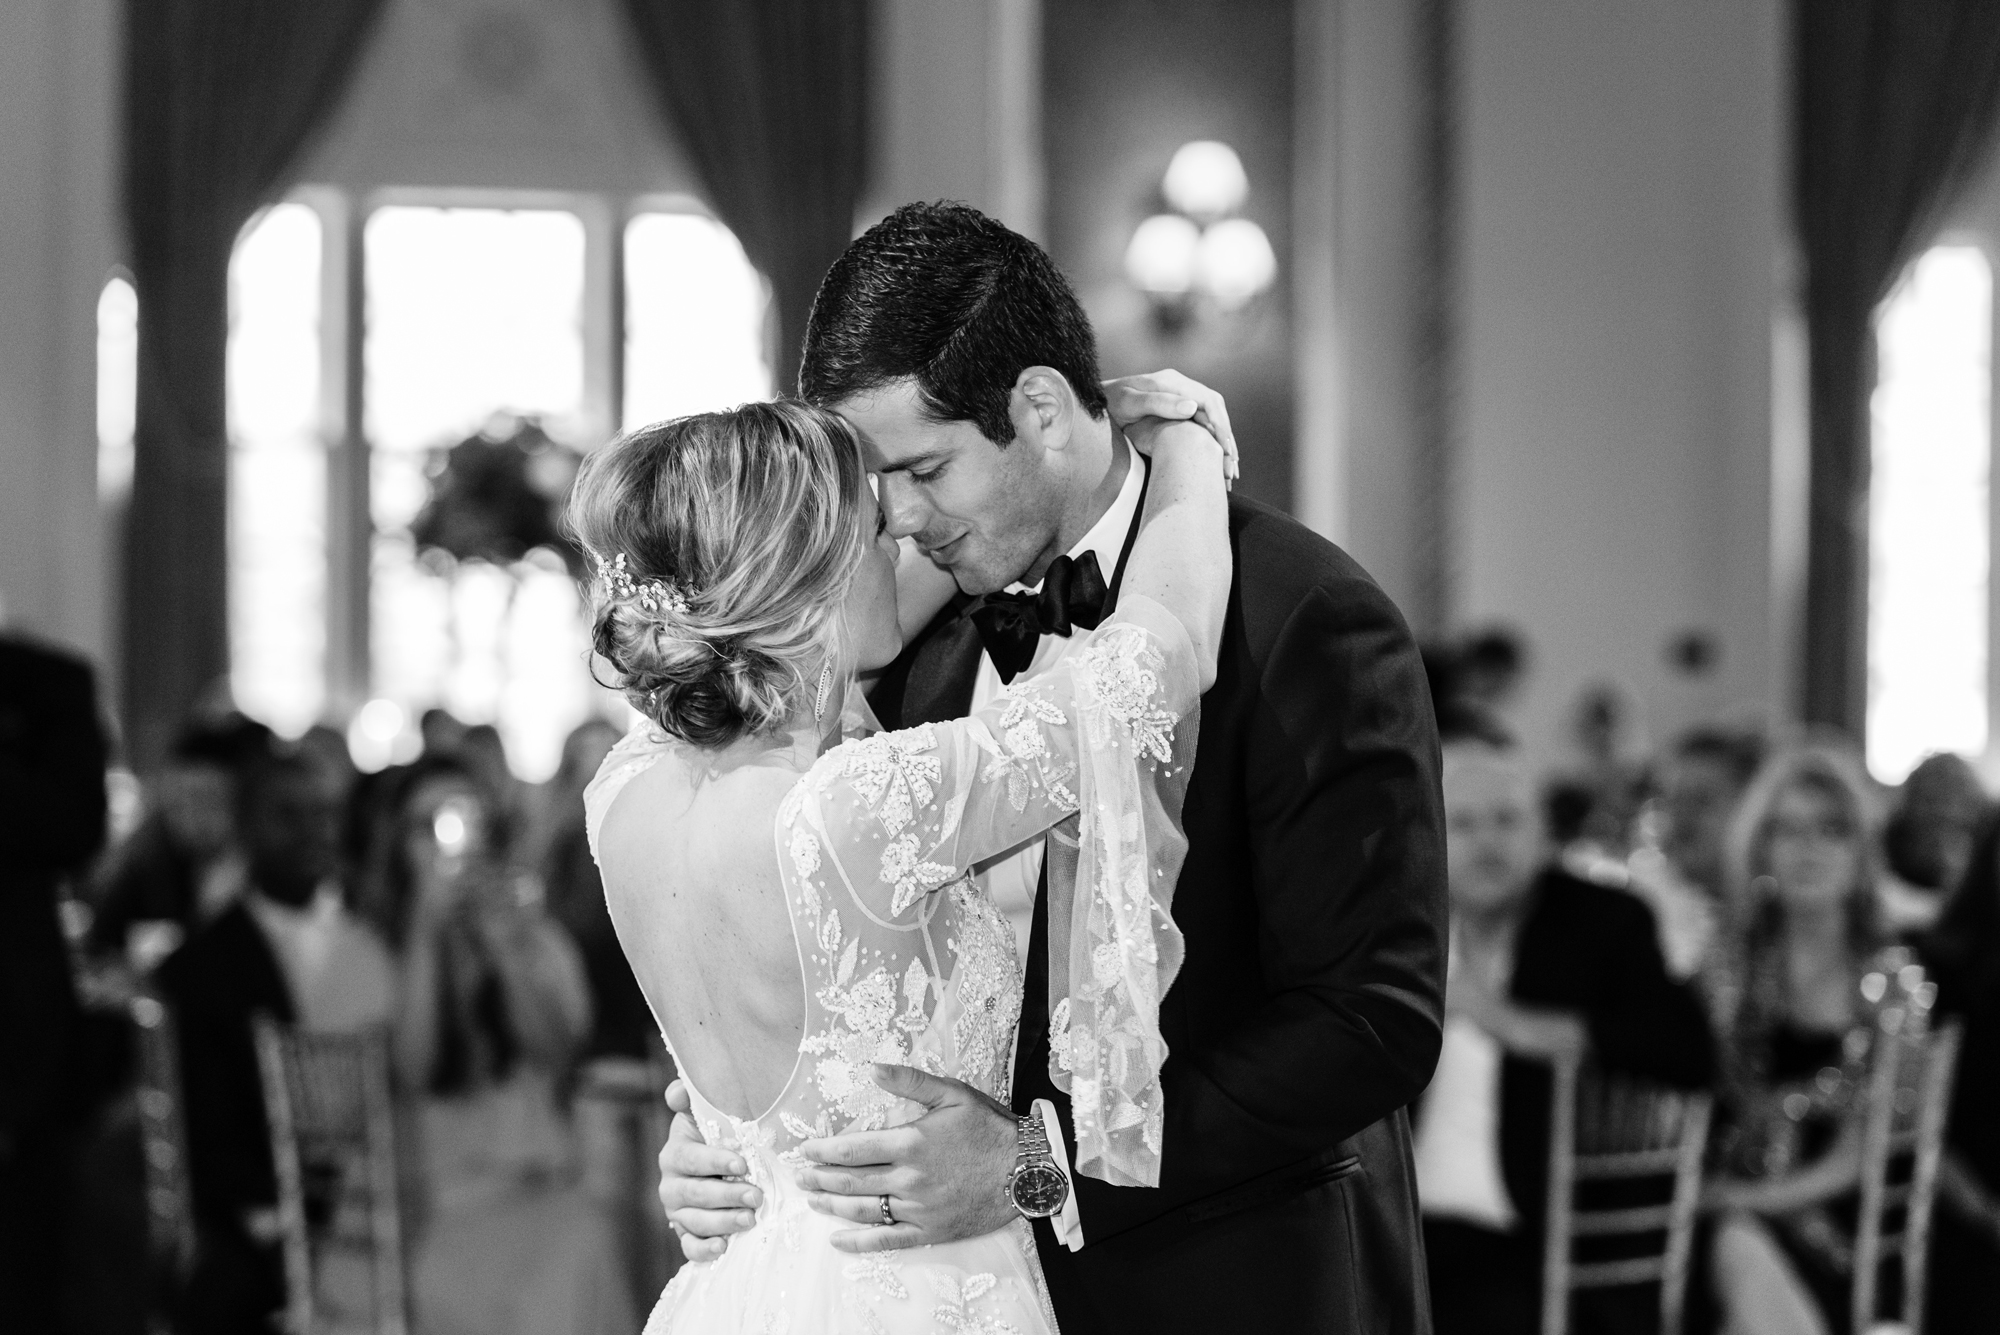 Bride & Groom’s first dance at a Wedding Reception at the Palais Royale